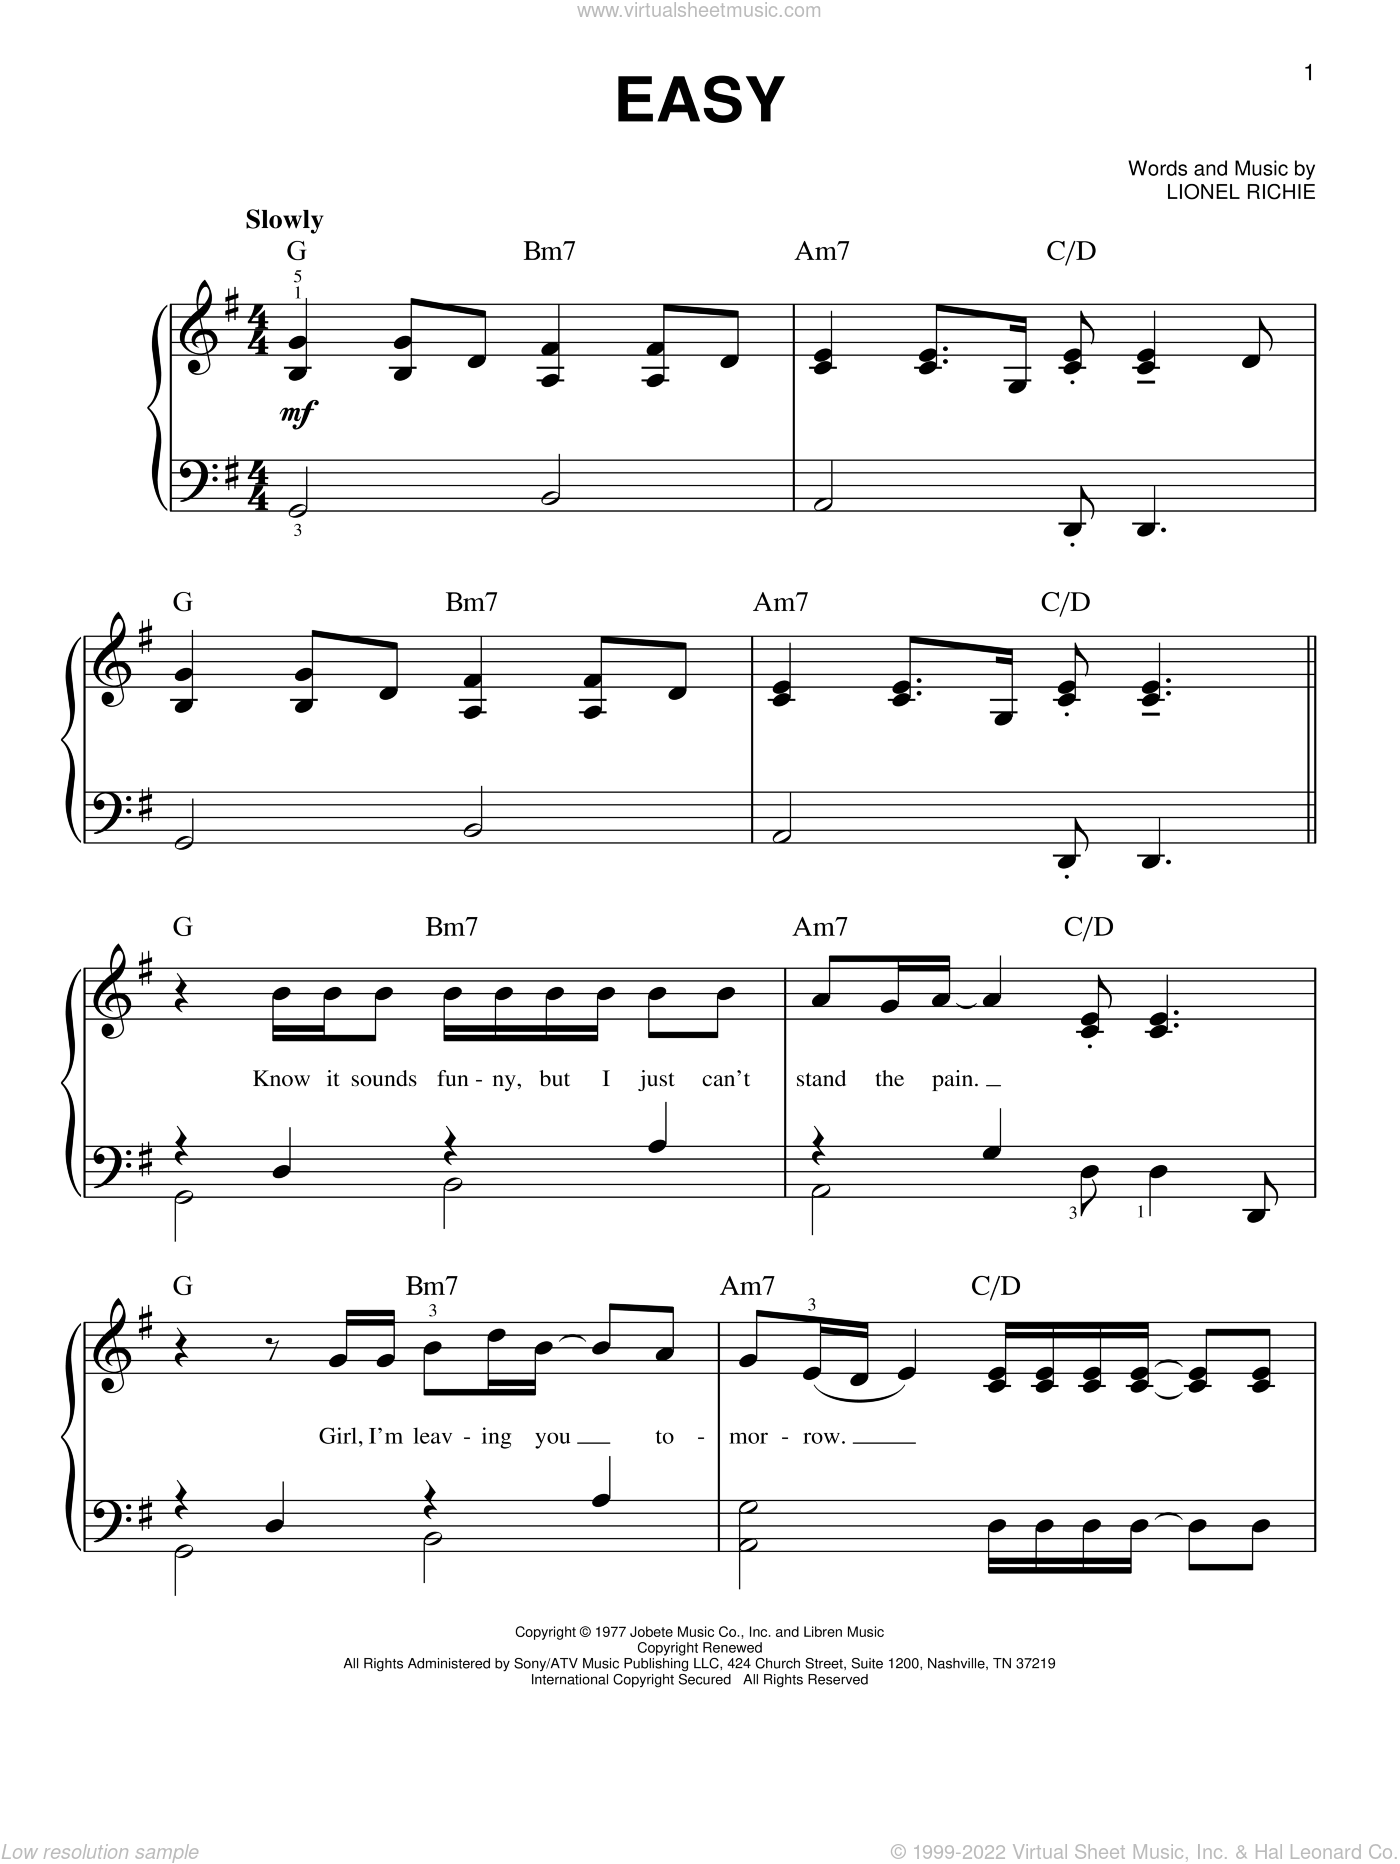 richie-easy-sheet-music-for-piano-solo